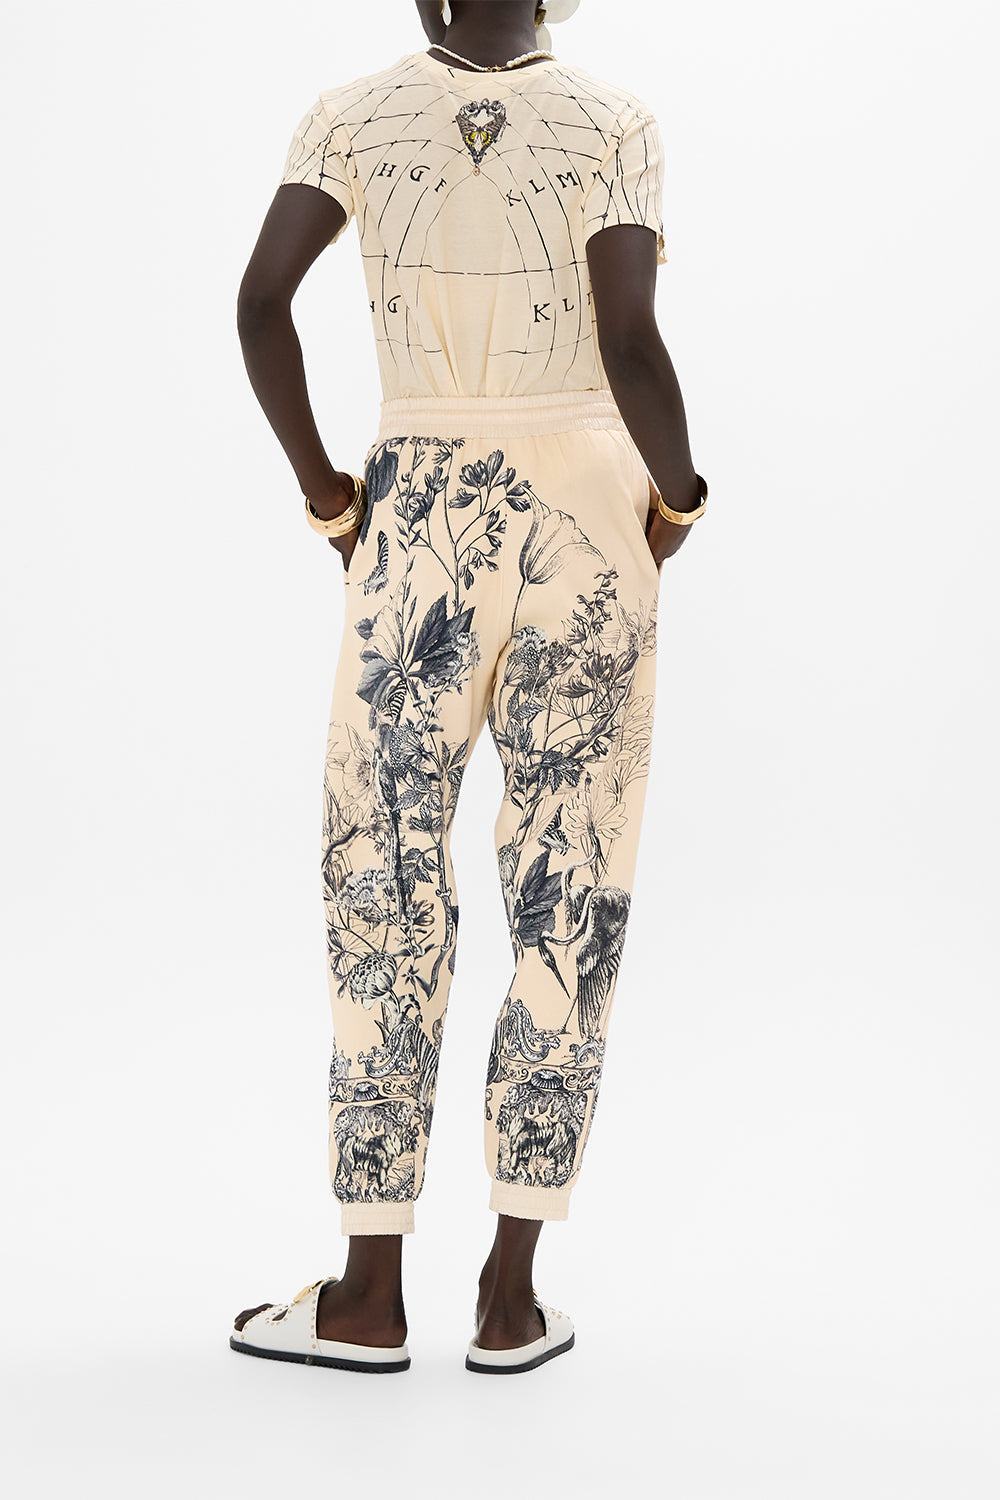 CAMILLA luxury track pants in Etched Into Eternity print